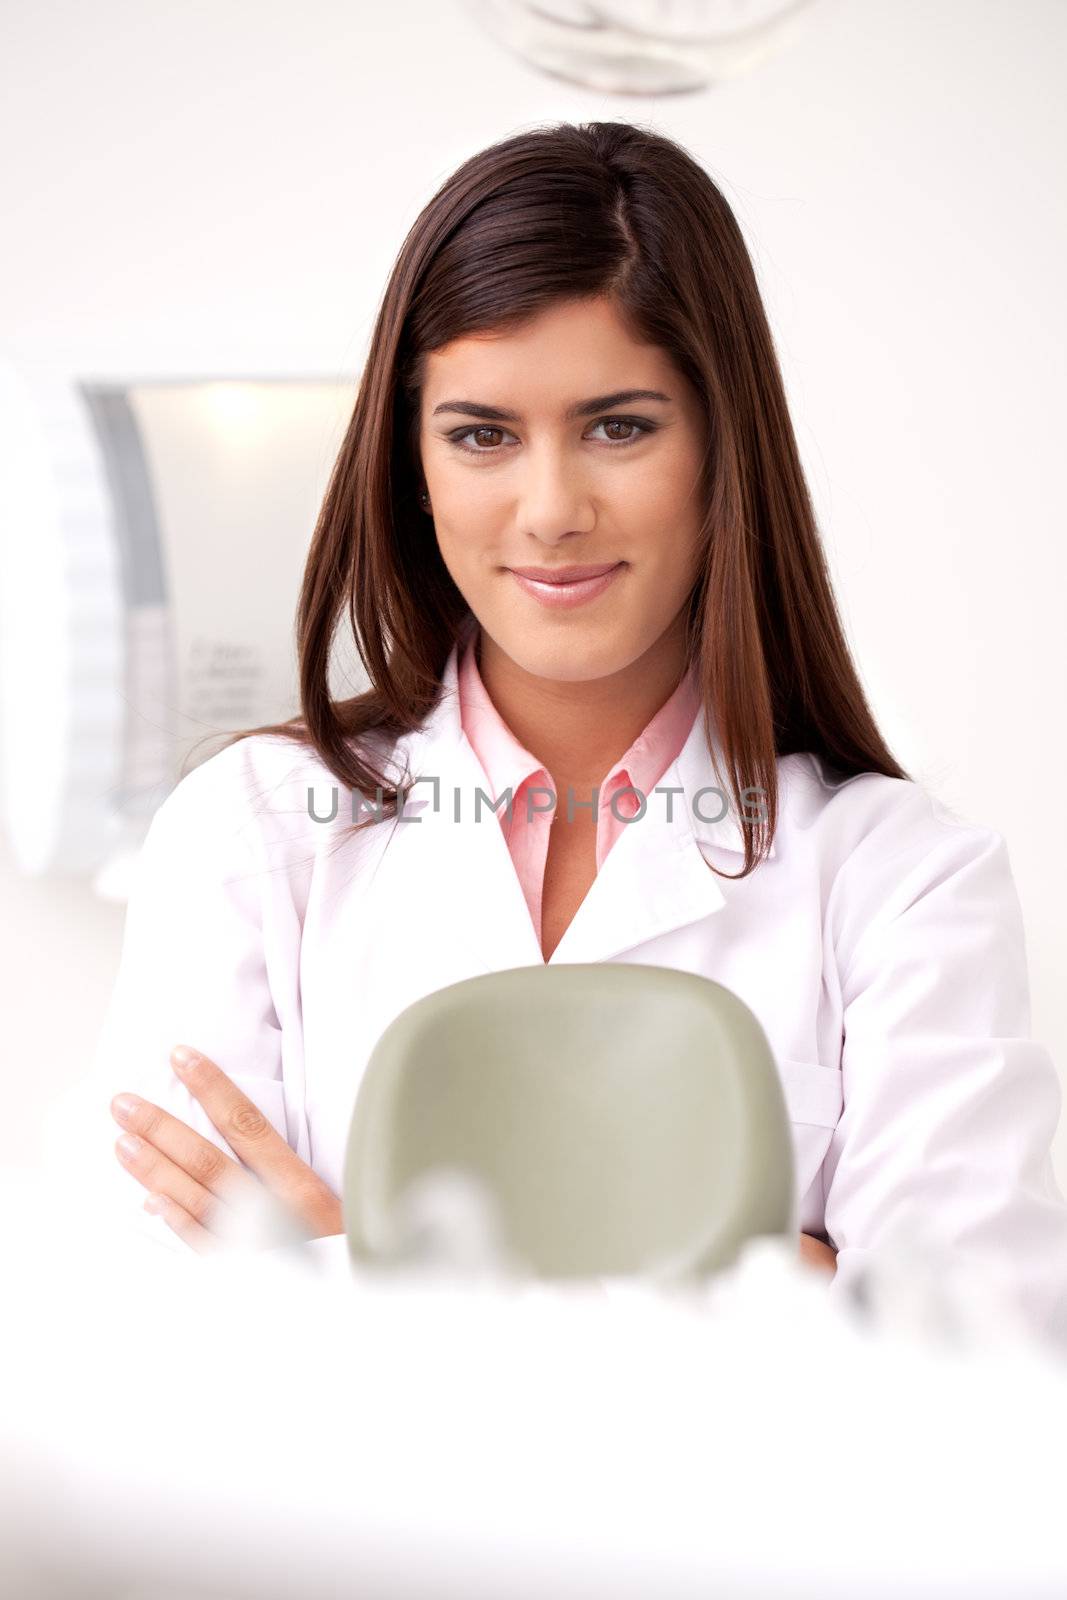 A young woman dentist smiling looking at the camera